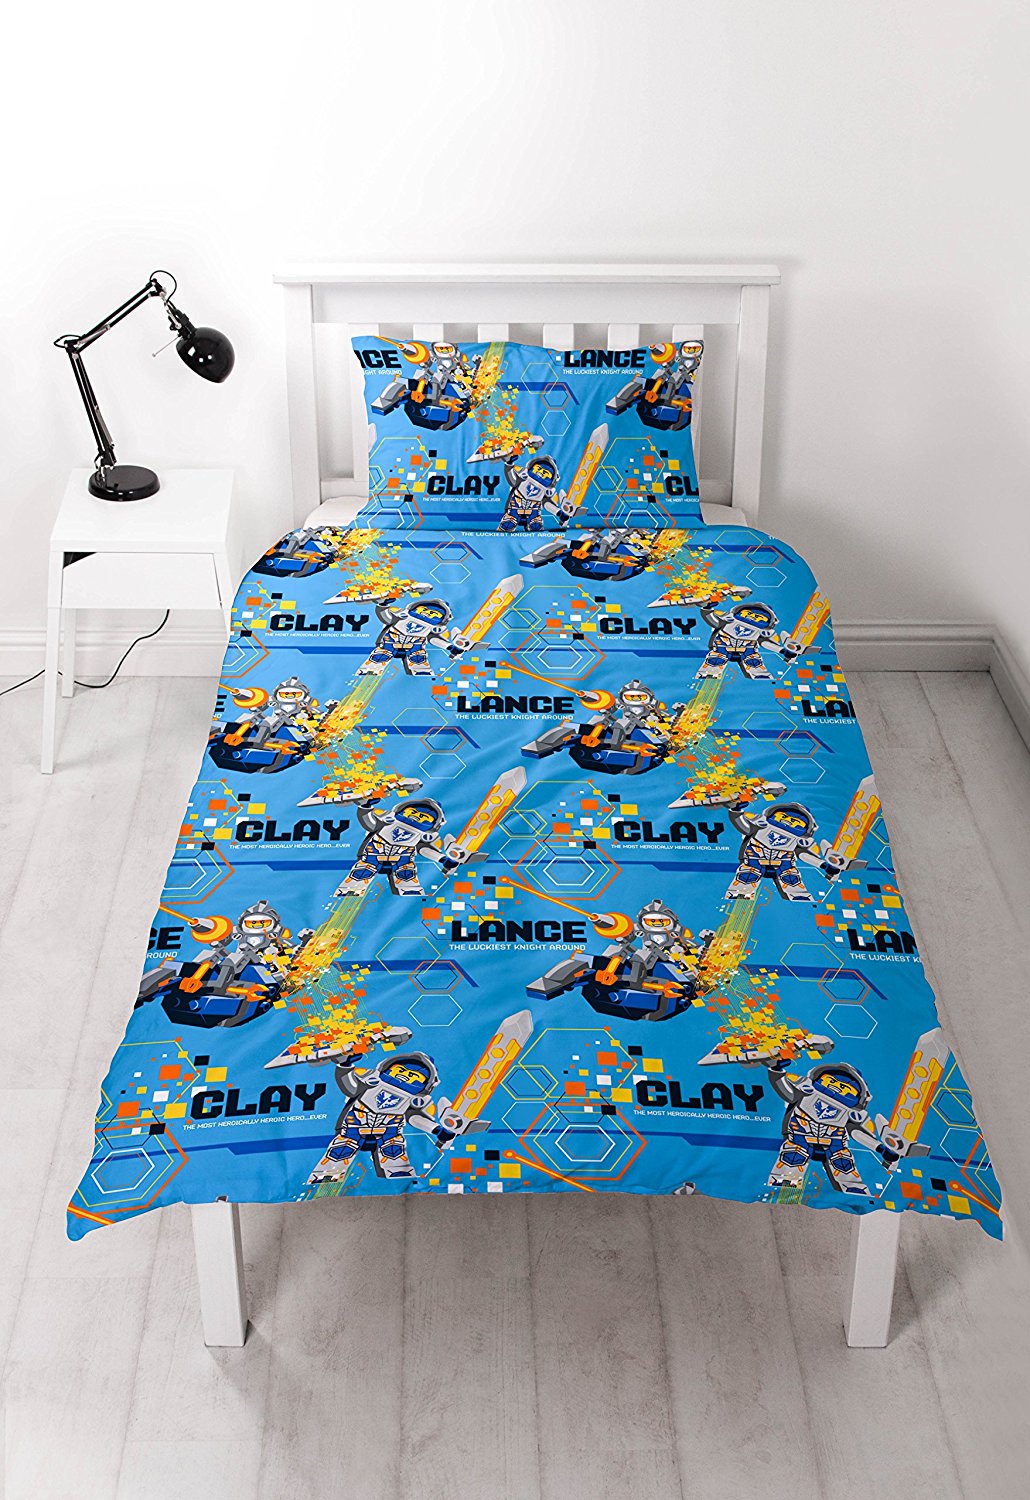 Lego Nexo Knights Rotary Single Bed Duvet Quilt Cover Set